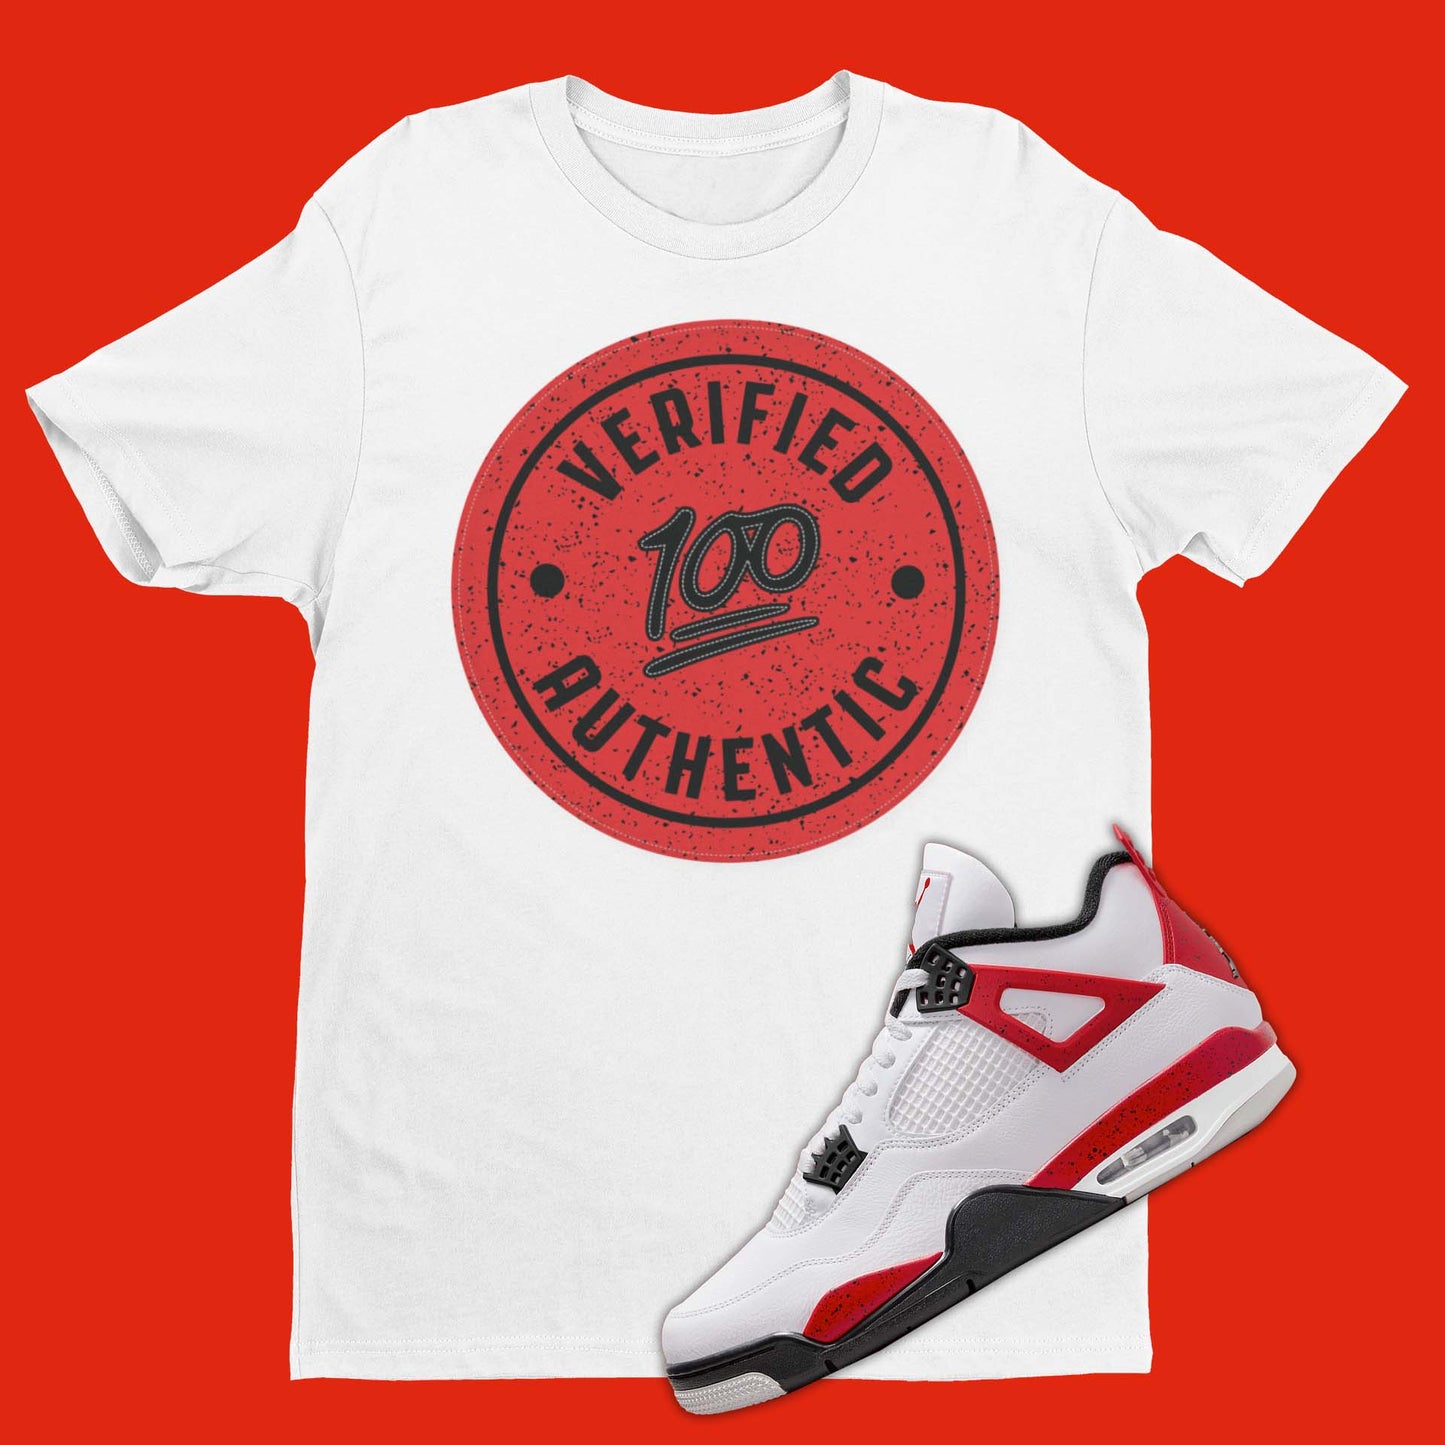 Verified Authentic Air Jordan 4 Red Cement Matching T-Shirt from SNKADX.